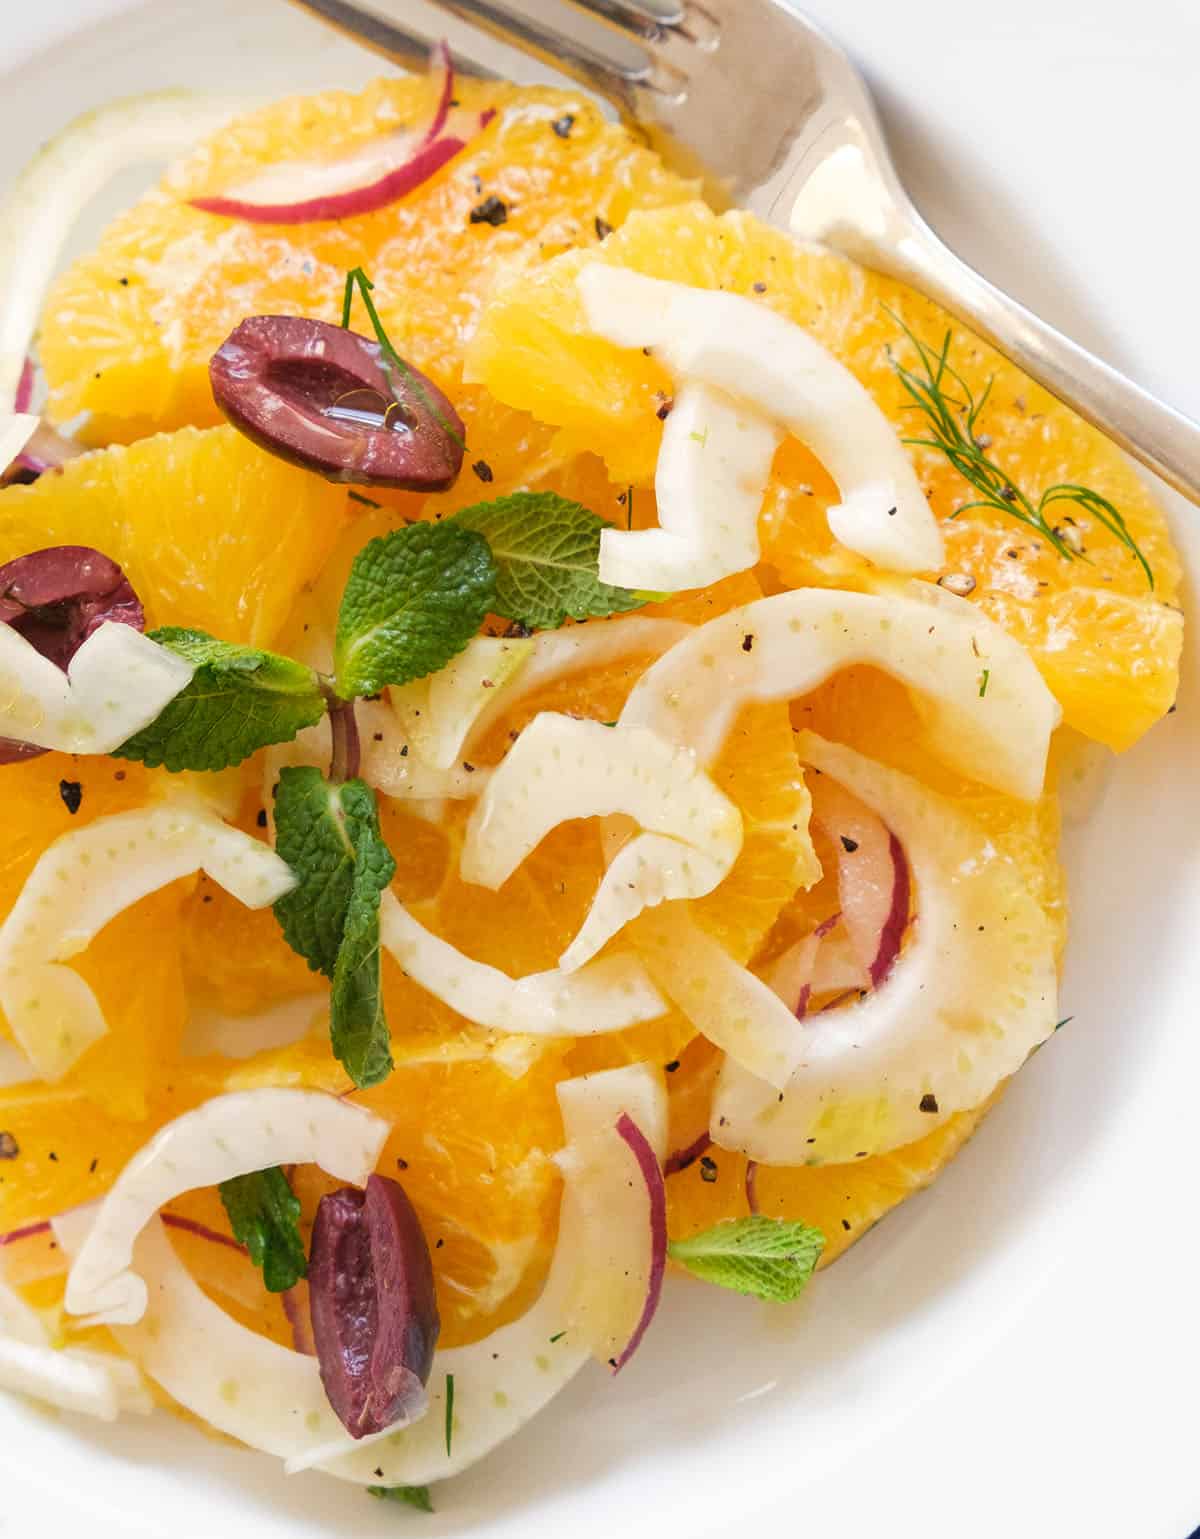 Close-up of a serving of juicy and bright orange salad.